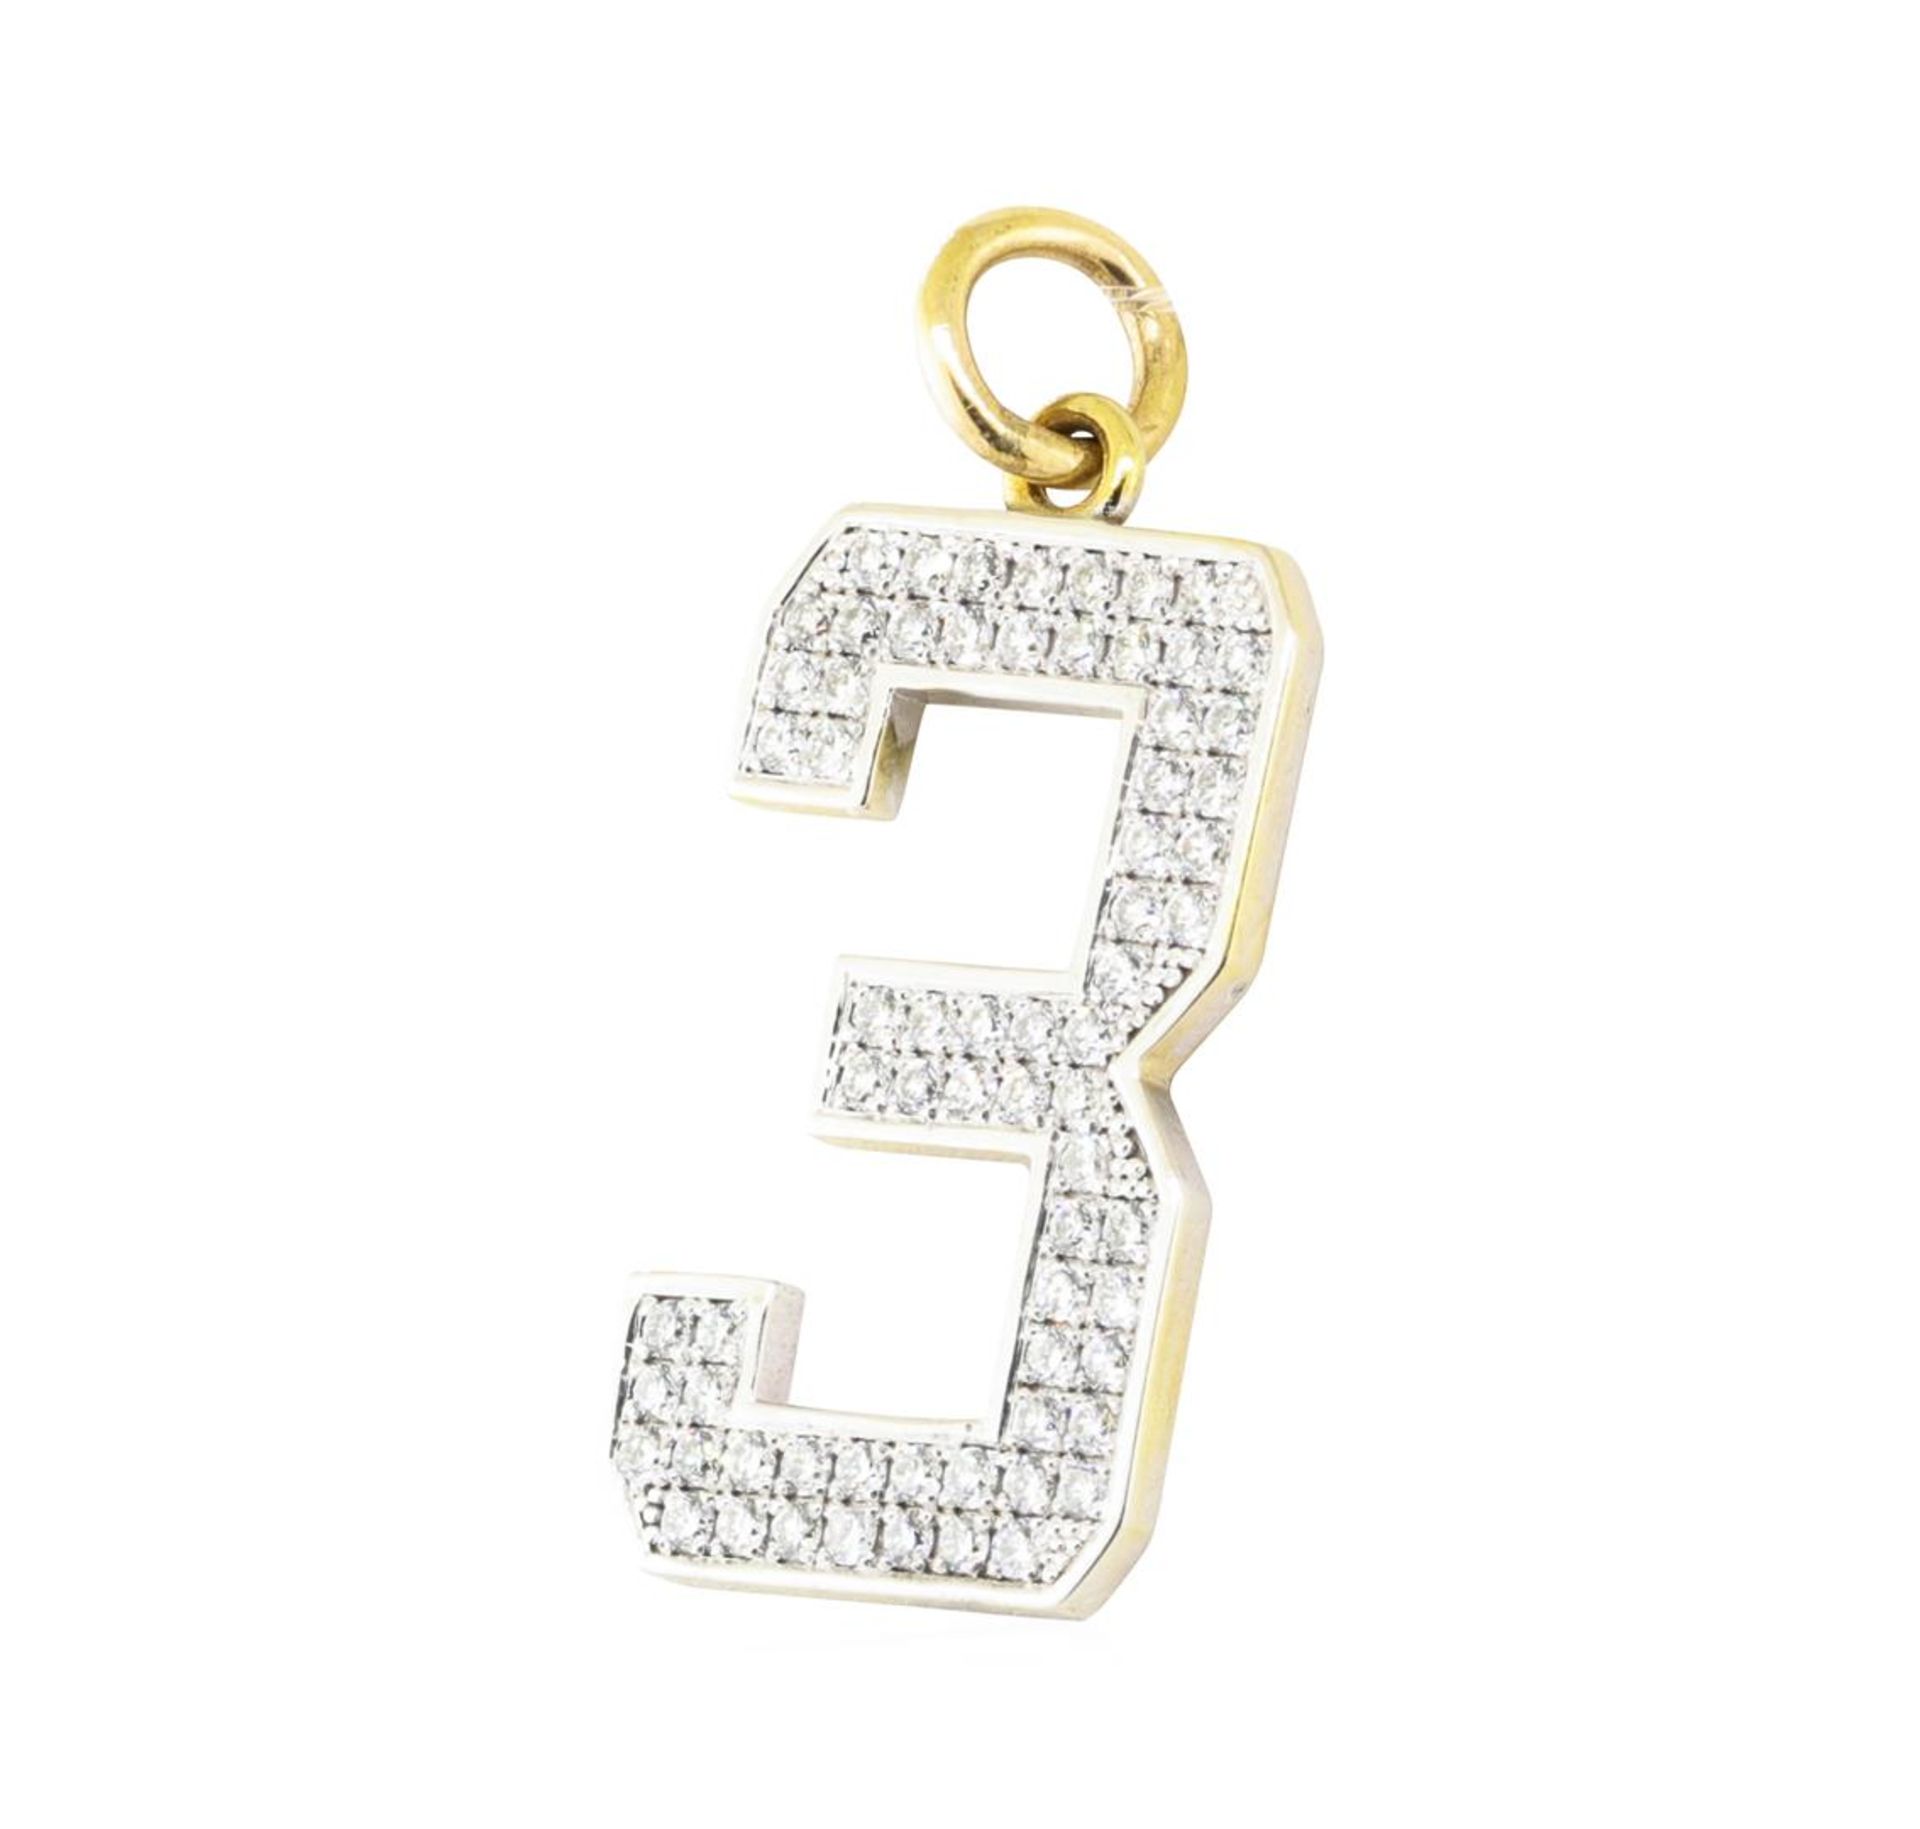 2.04ctw Diamond "3" Pendant - 14KT Yellow and White Gold - Image 2 of 2